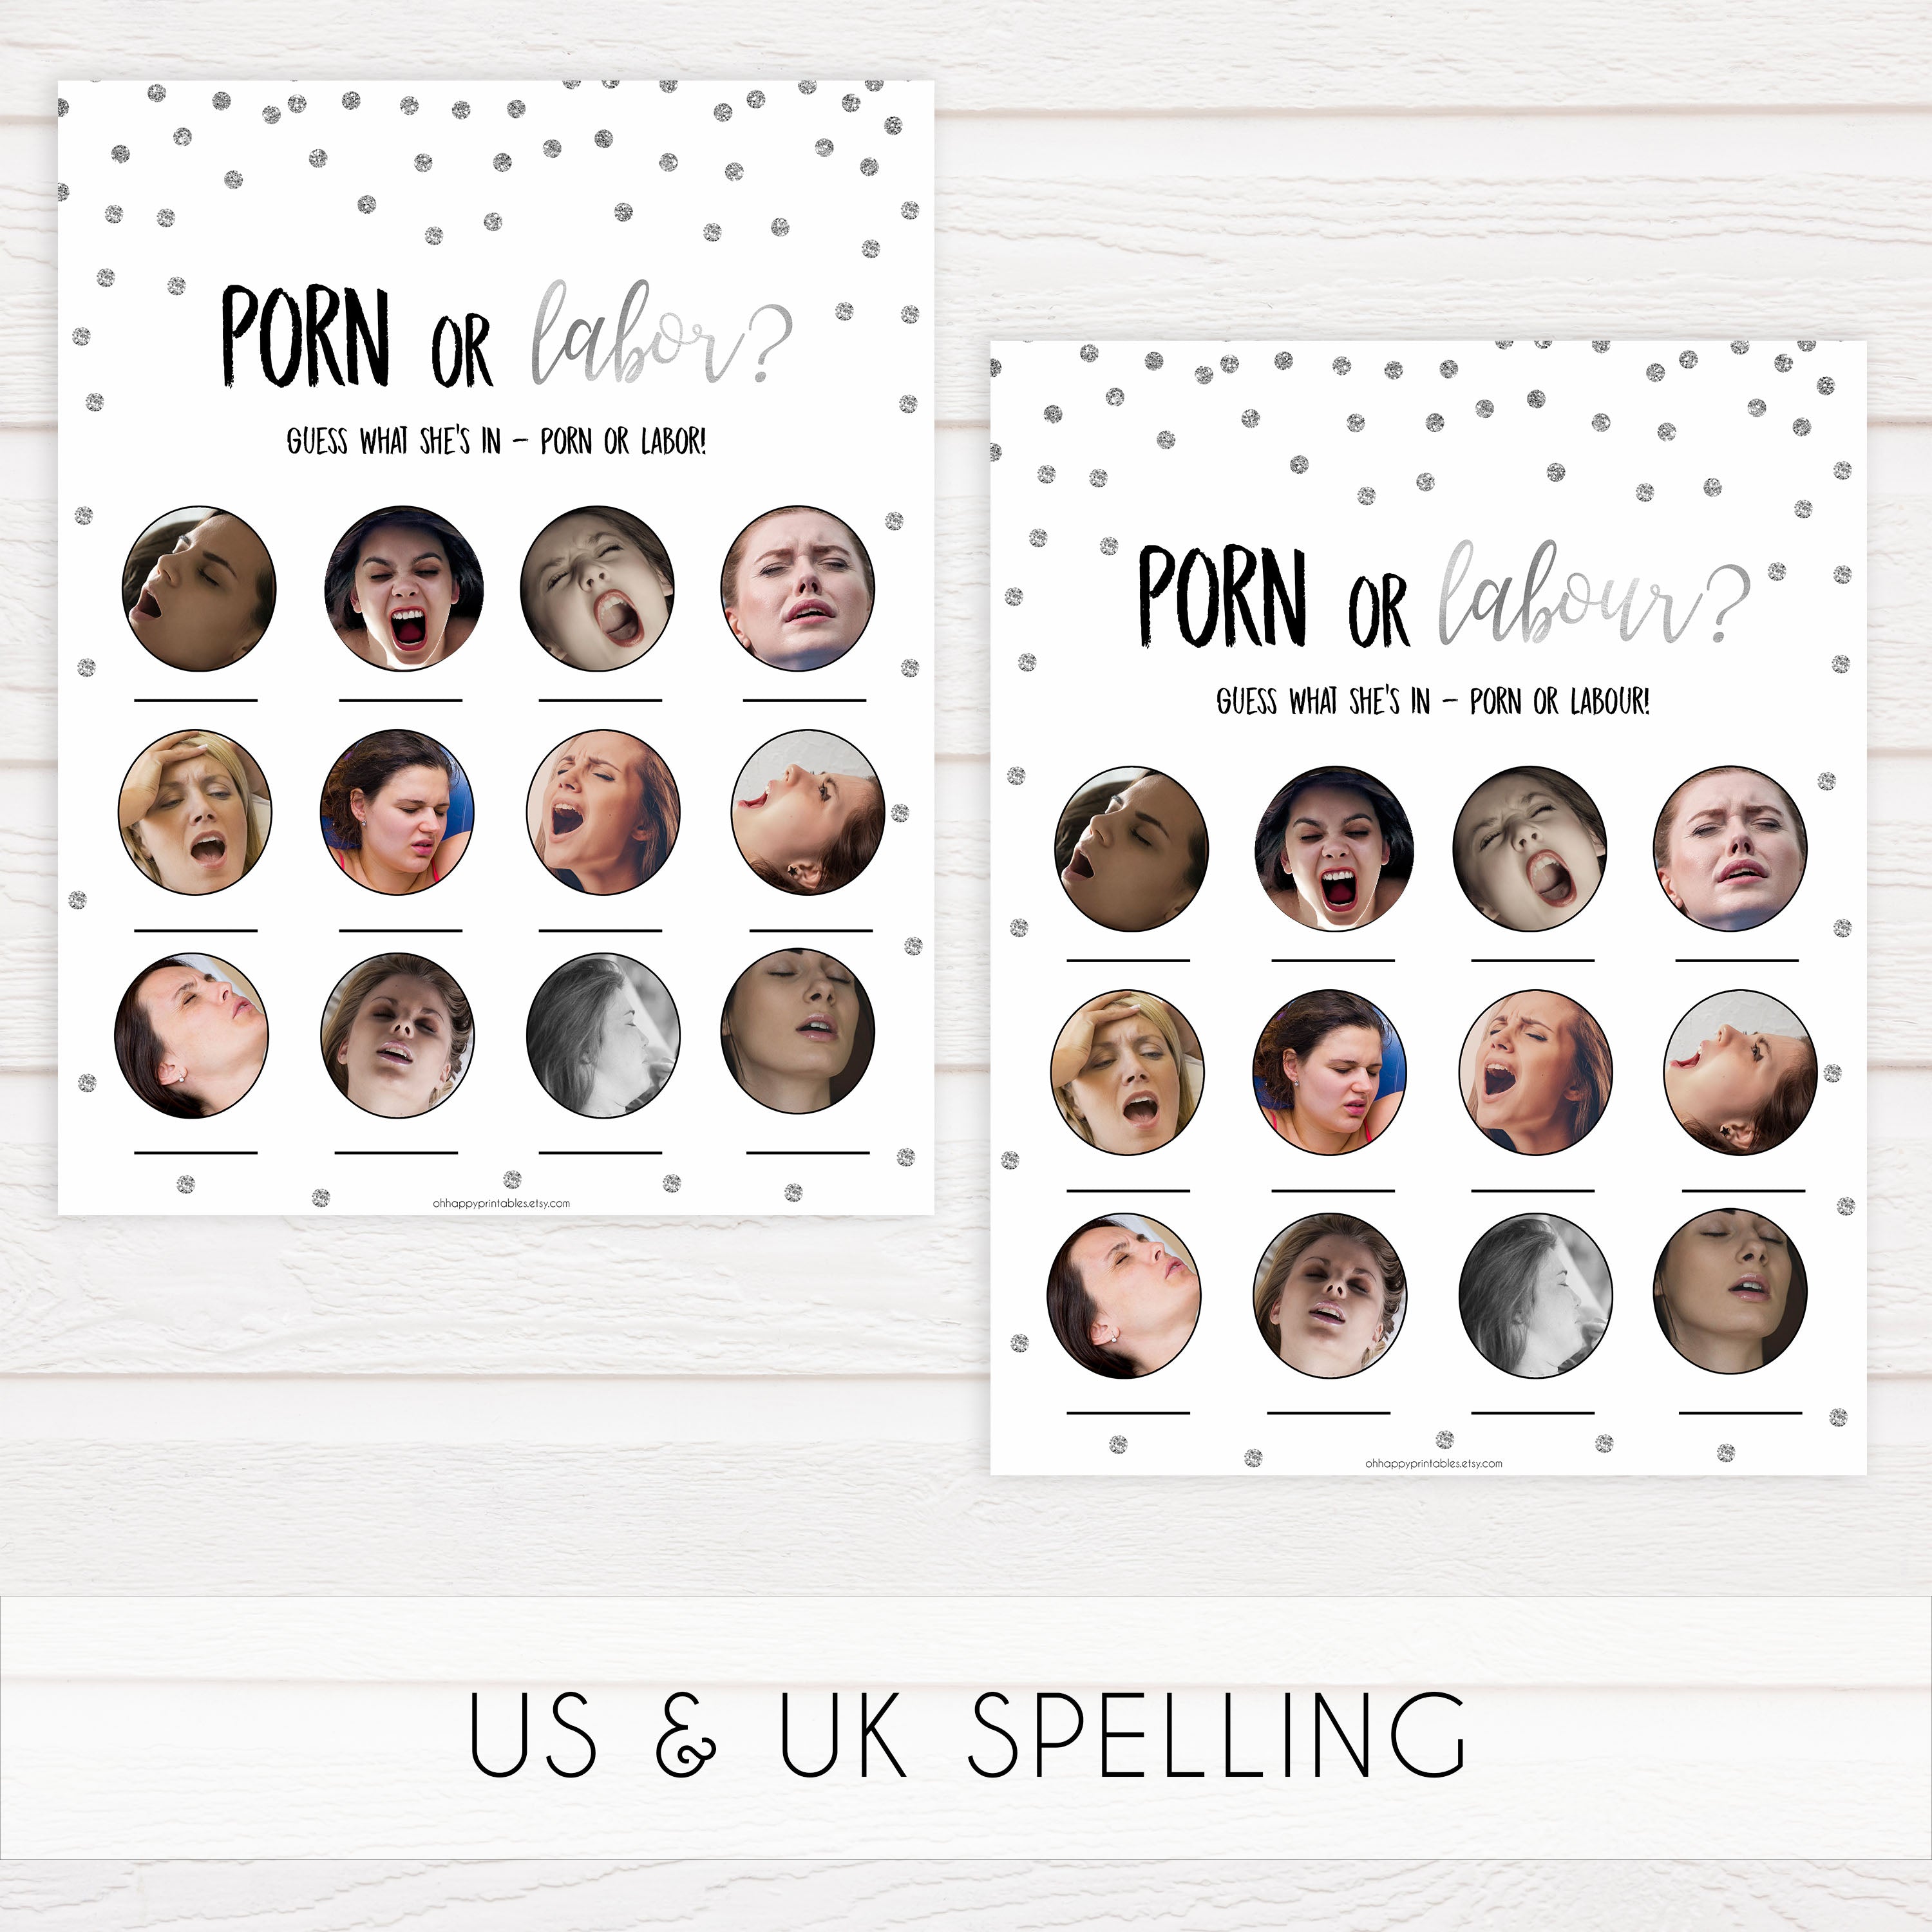 labor or porn, porn or baby games, Printable baby shower games, baby silver glitter fun baby games, baby shower games, fun baby shower ideas, top baby shower ideas, silver glitter shower baby shower, friends baby shower ideas